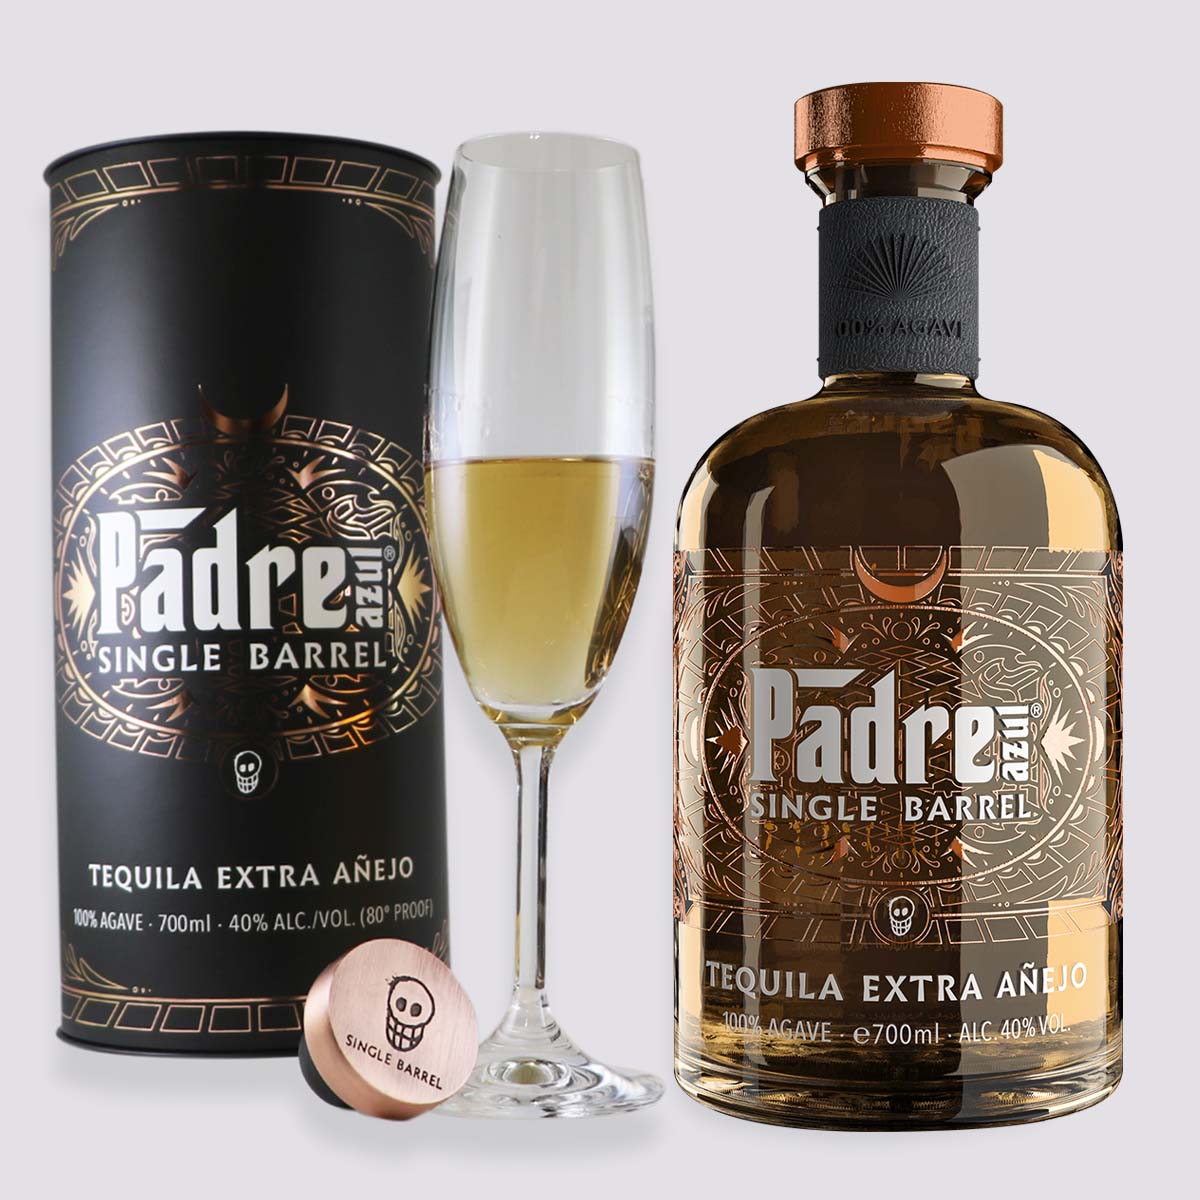 Padre Azul Tequila